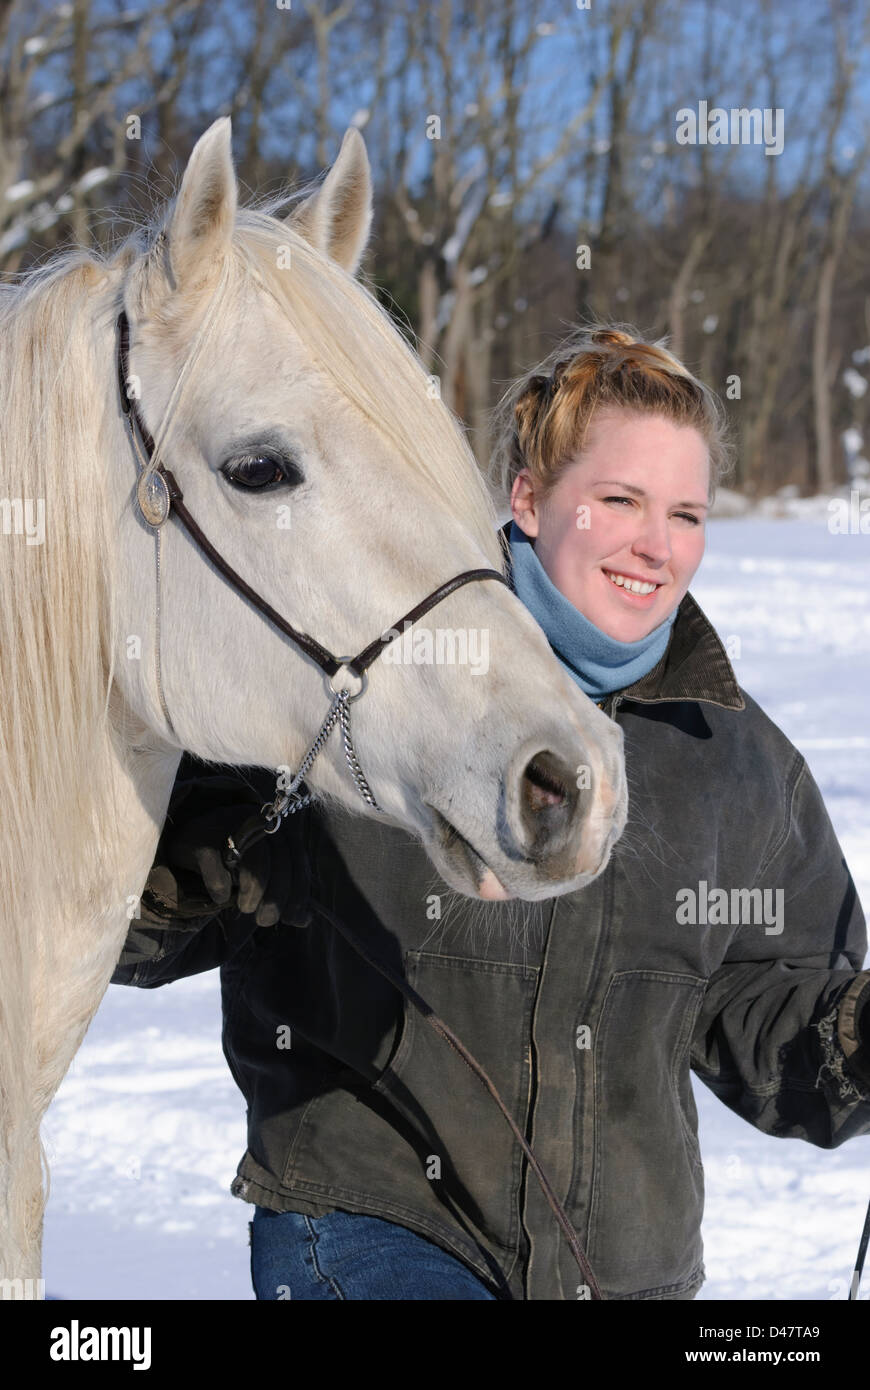 Woman and her white horse in outdoor winter snow portrait, a twenty-something blond and an Arabian stallion. Stock Photo